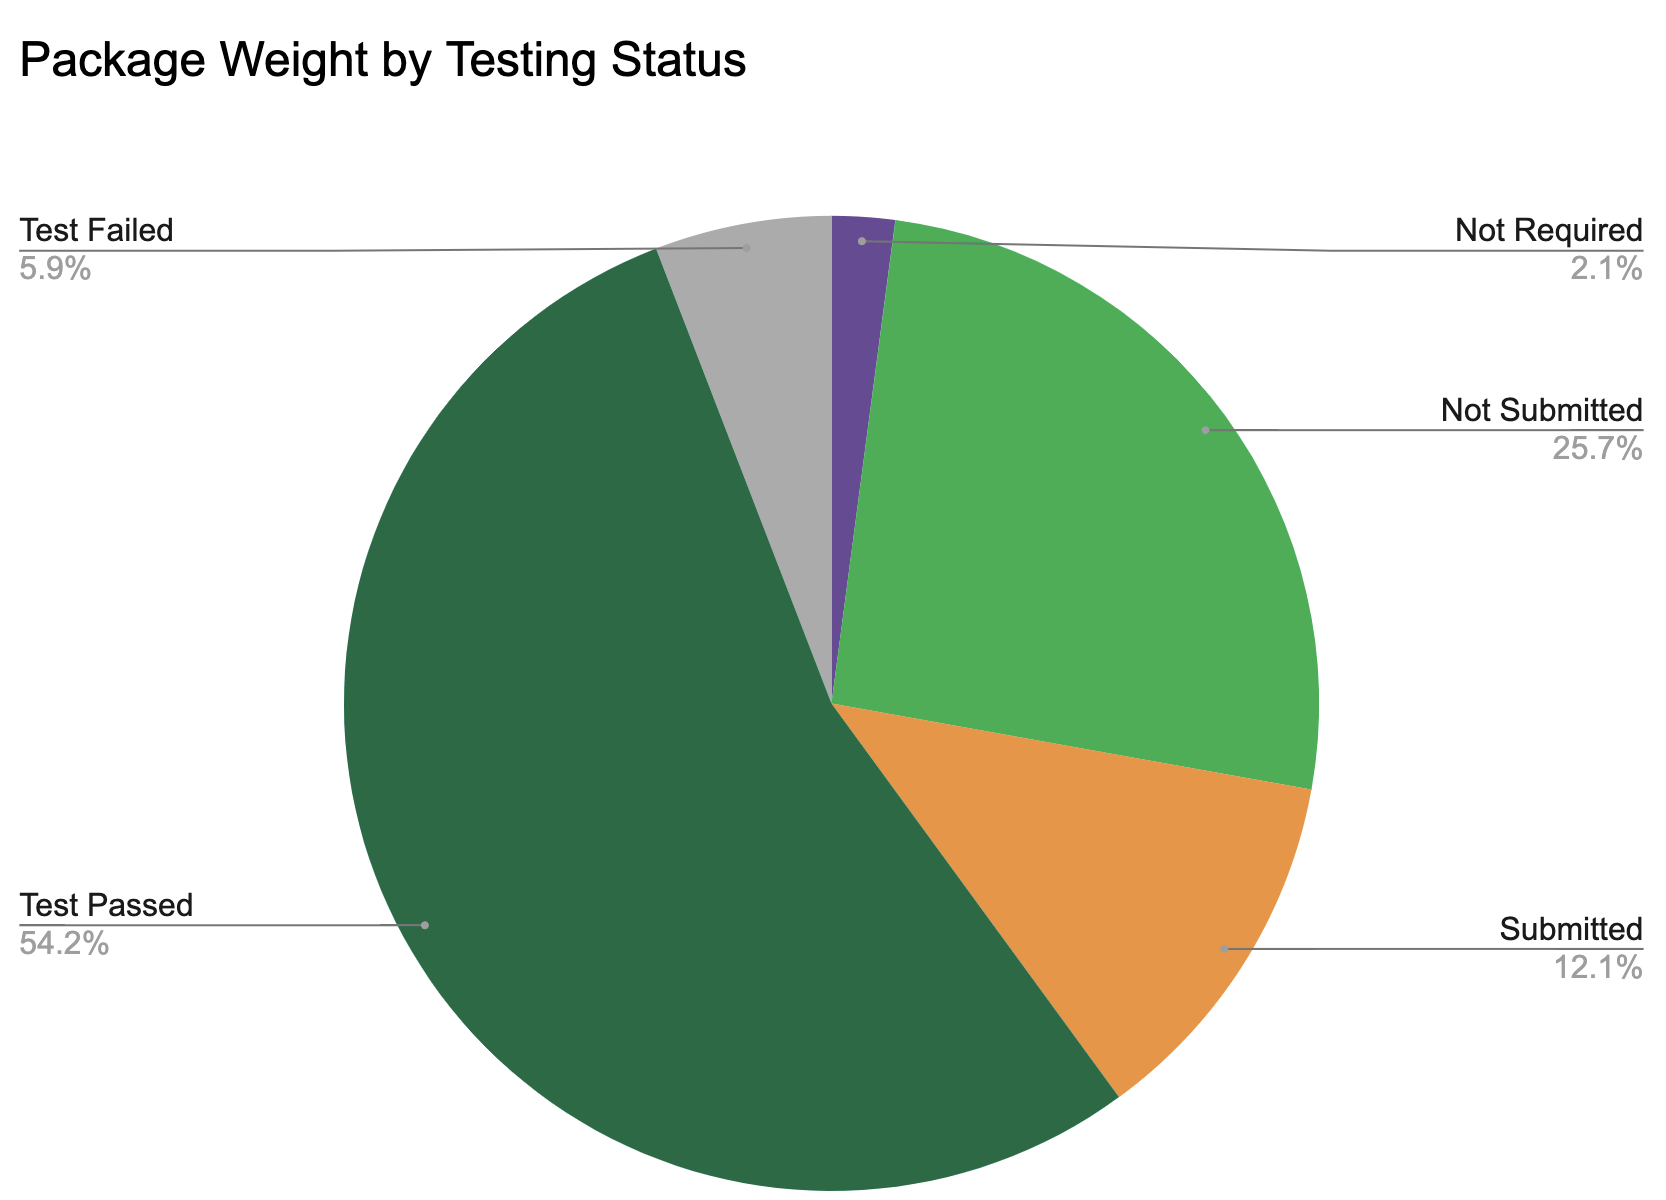 Sample package weight by testing status pie chart on StashStock's Cannalytics page